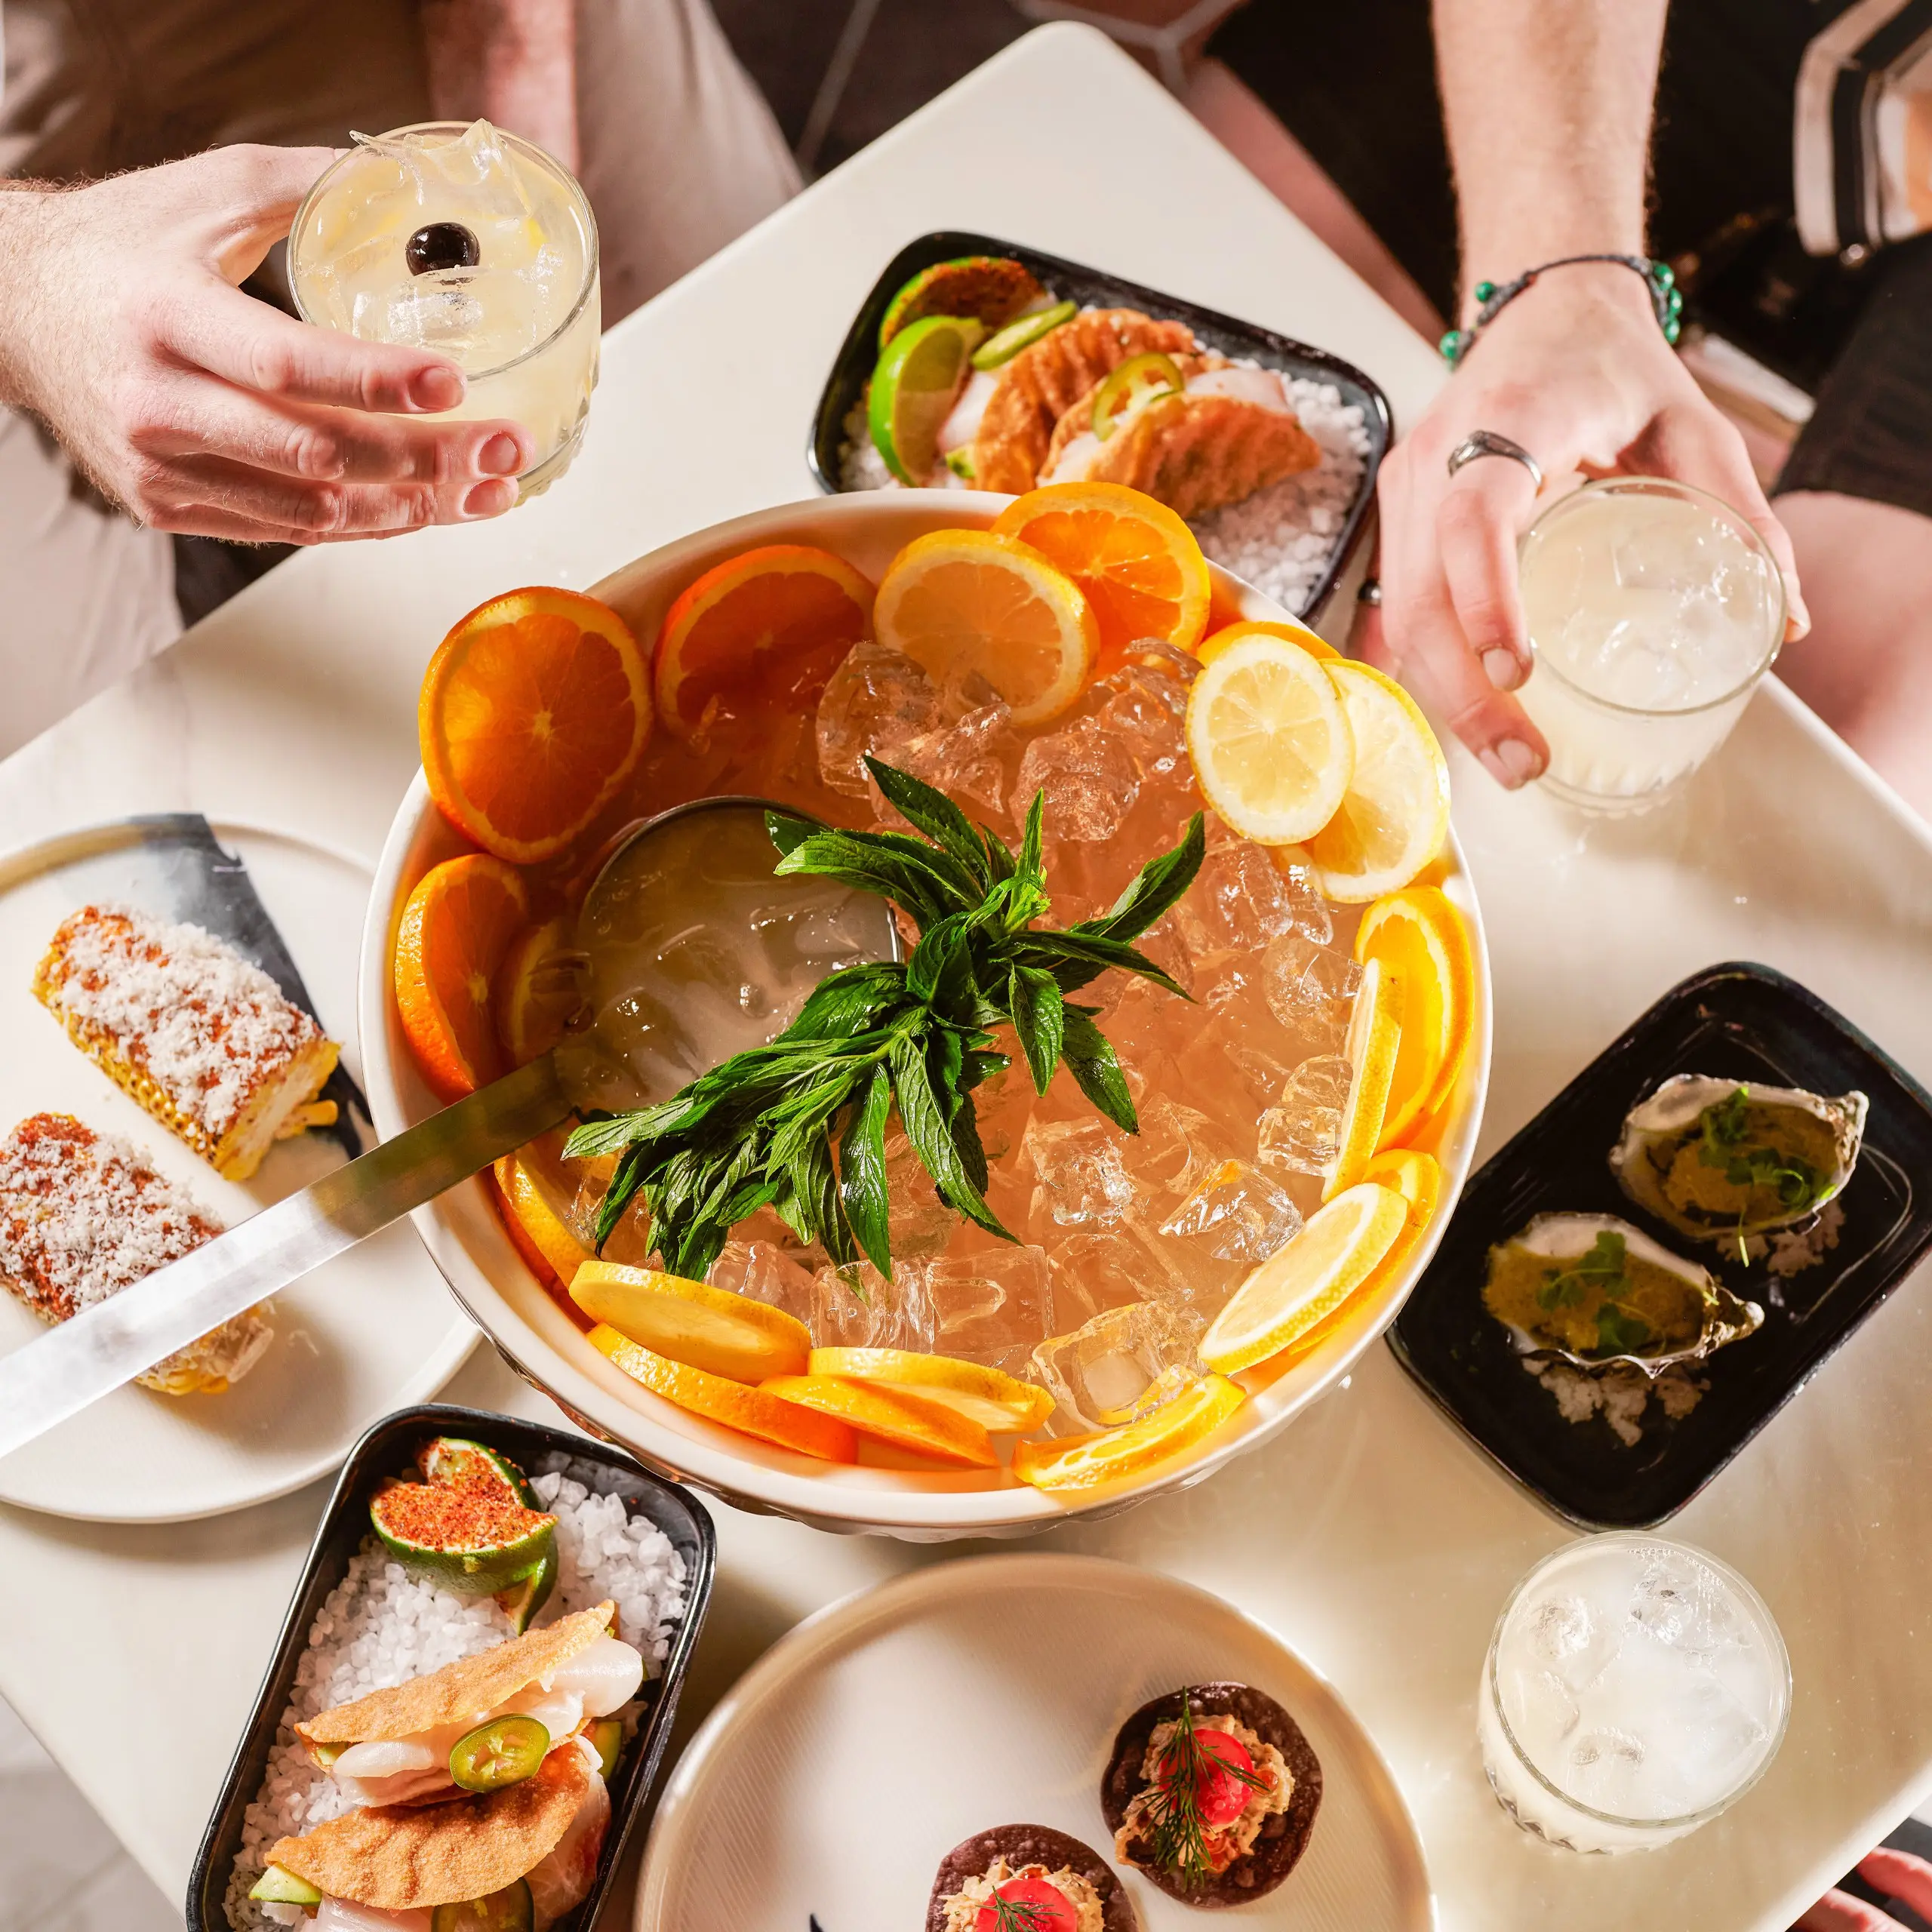 Sharing punch bowl with food